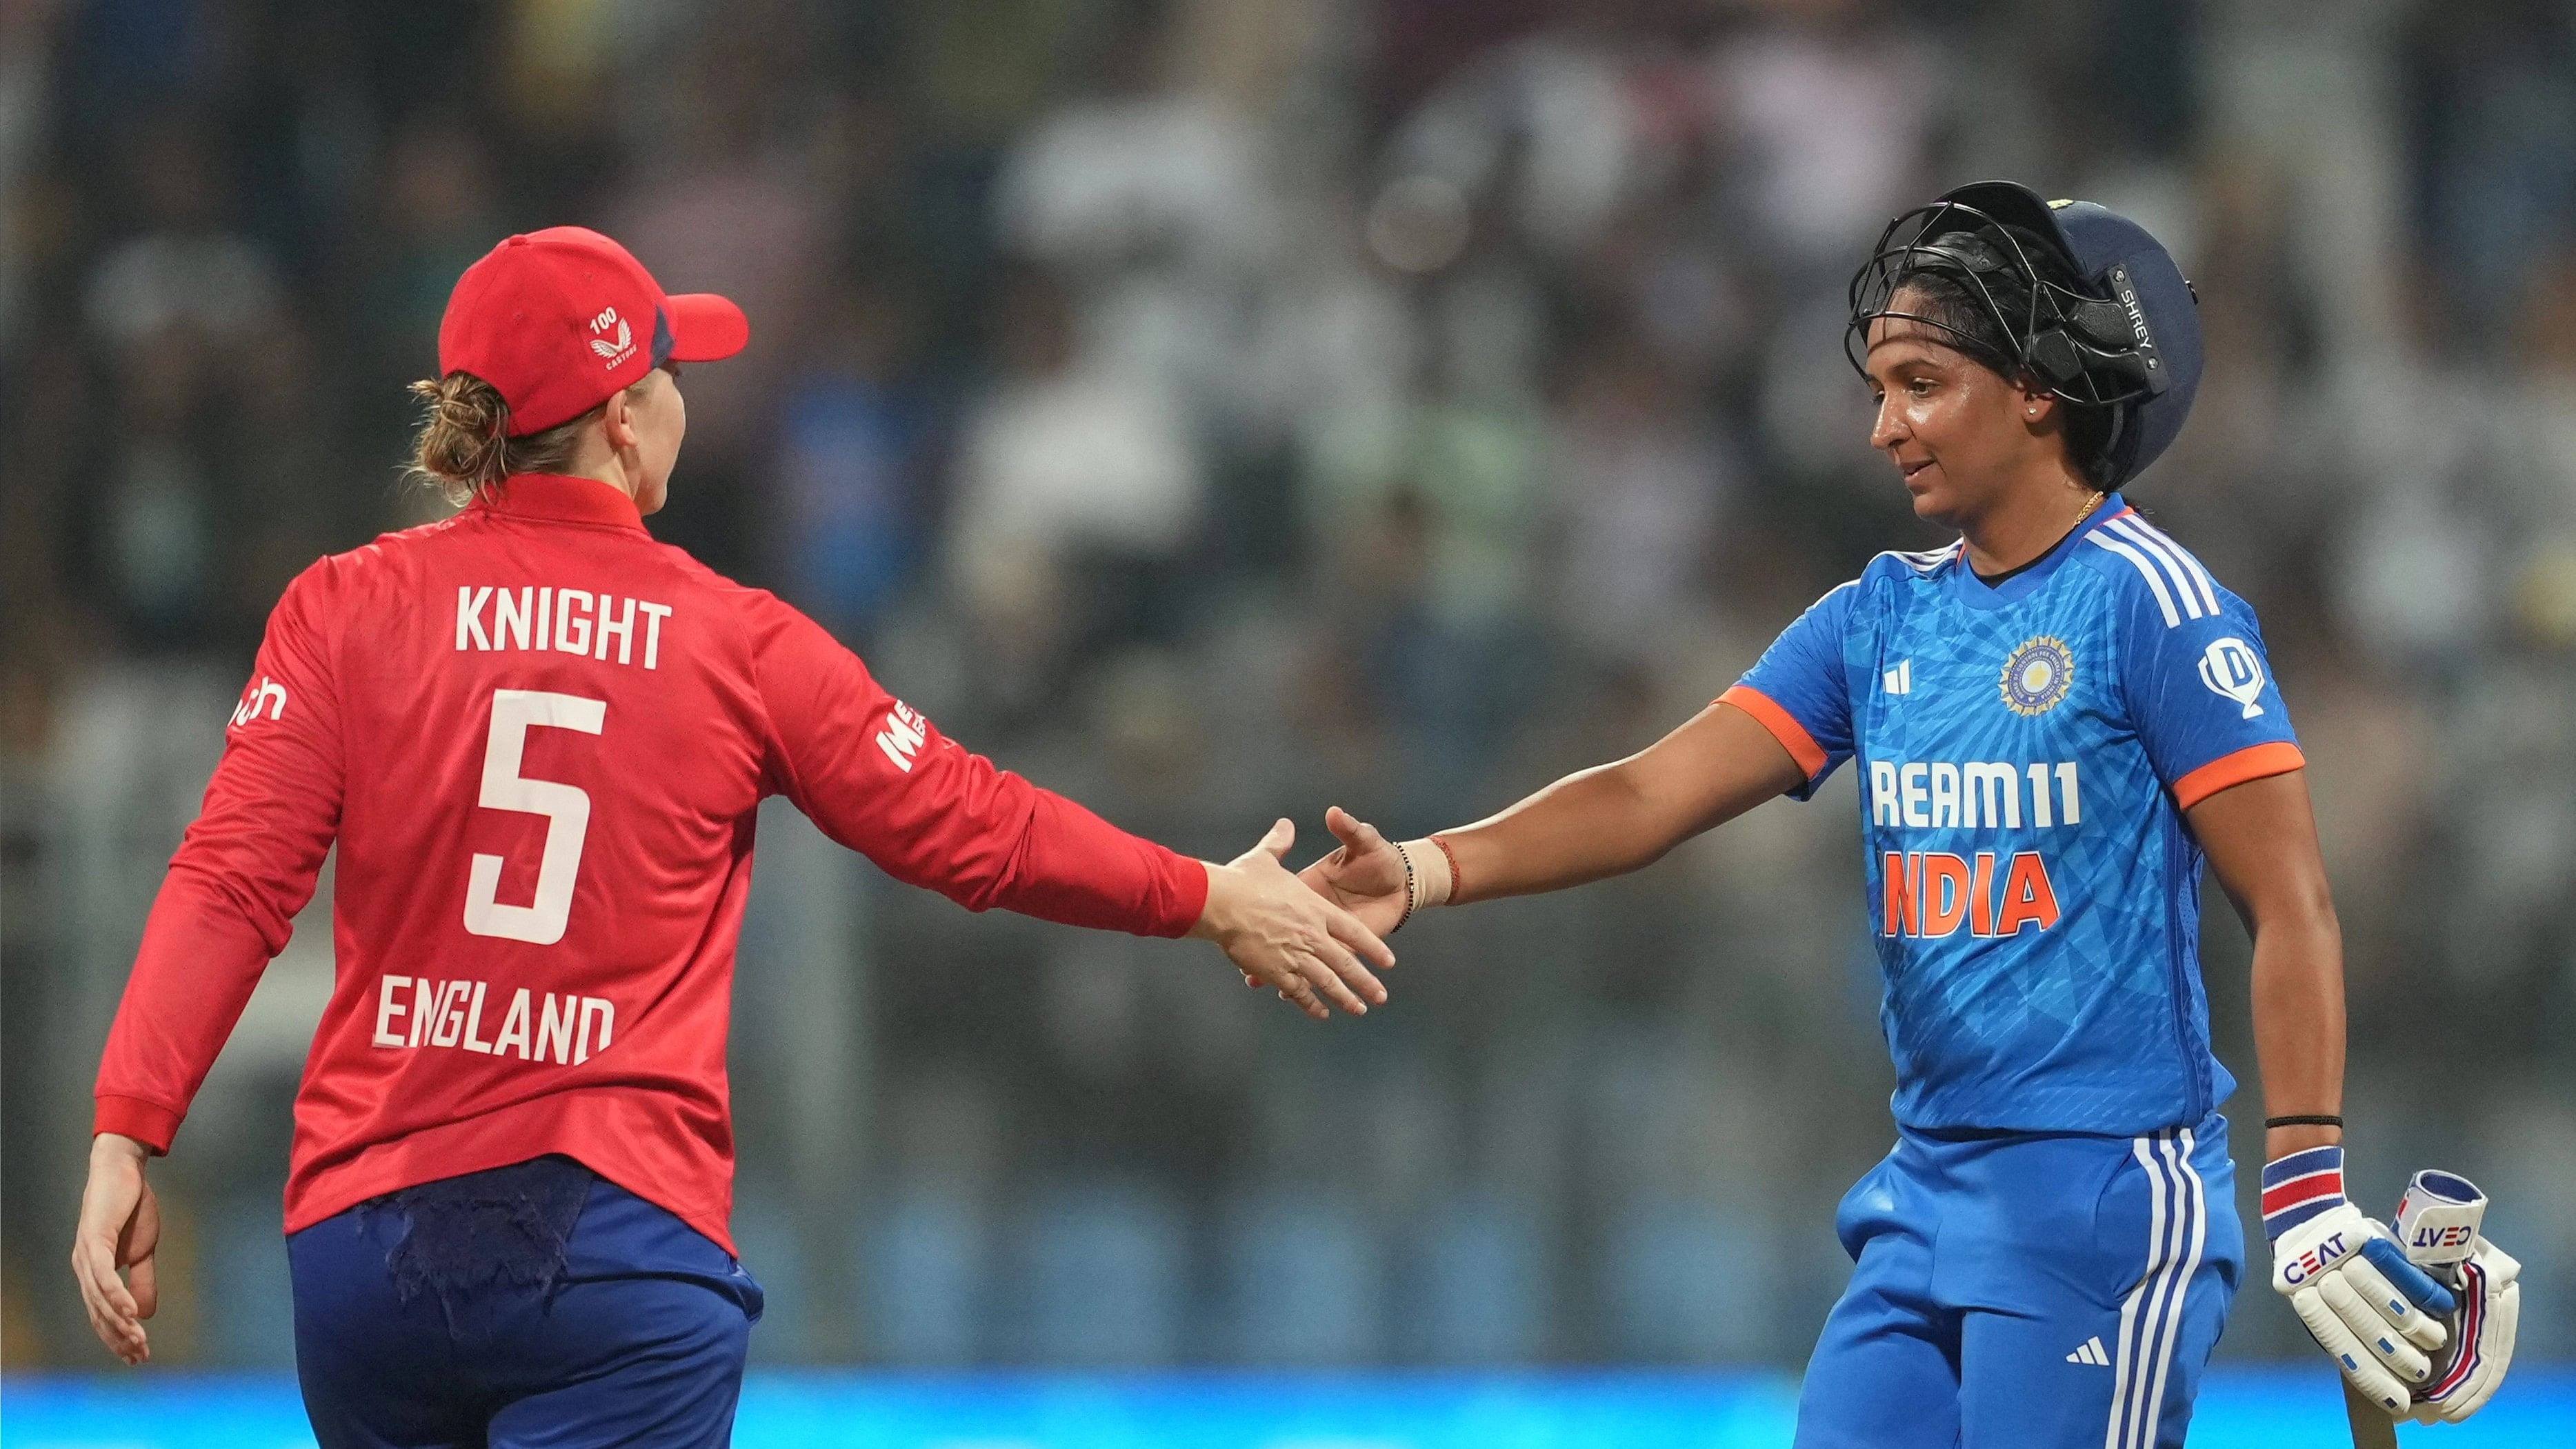 <div class="paragraphs"><p>India's Harmanpreet Kaur and England's Heather Knight greet each other at the end of the 3rd T20I cricket match between India and England, at Wankhede Stadium, in Mumbai. India Women won the match by 5 wickets.</p></div>